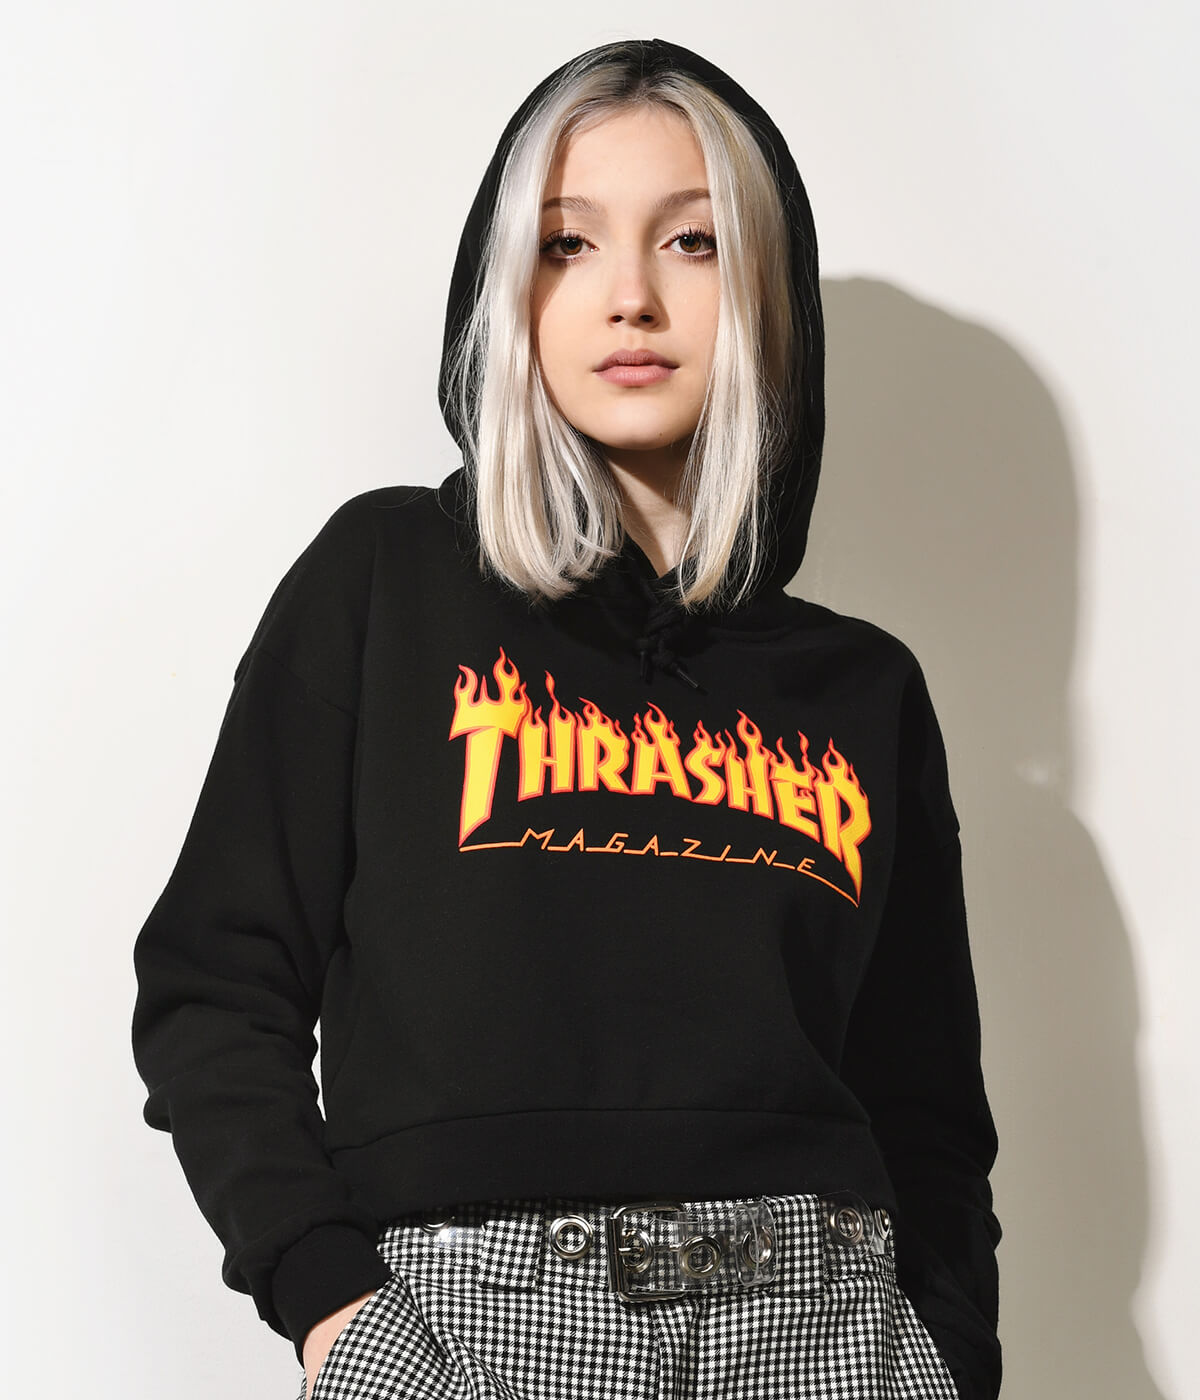 WOMEN'S NEW ARRIVAL HOODIES FEAT. THRASHER AND MORE - SHOP HOODIES